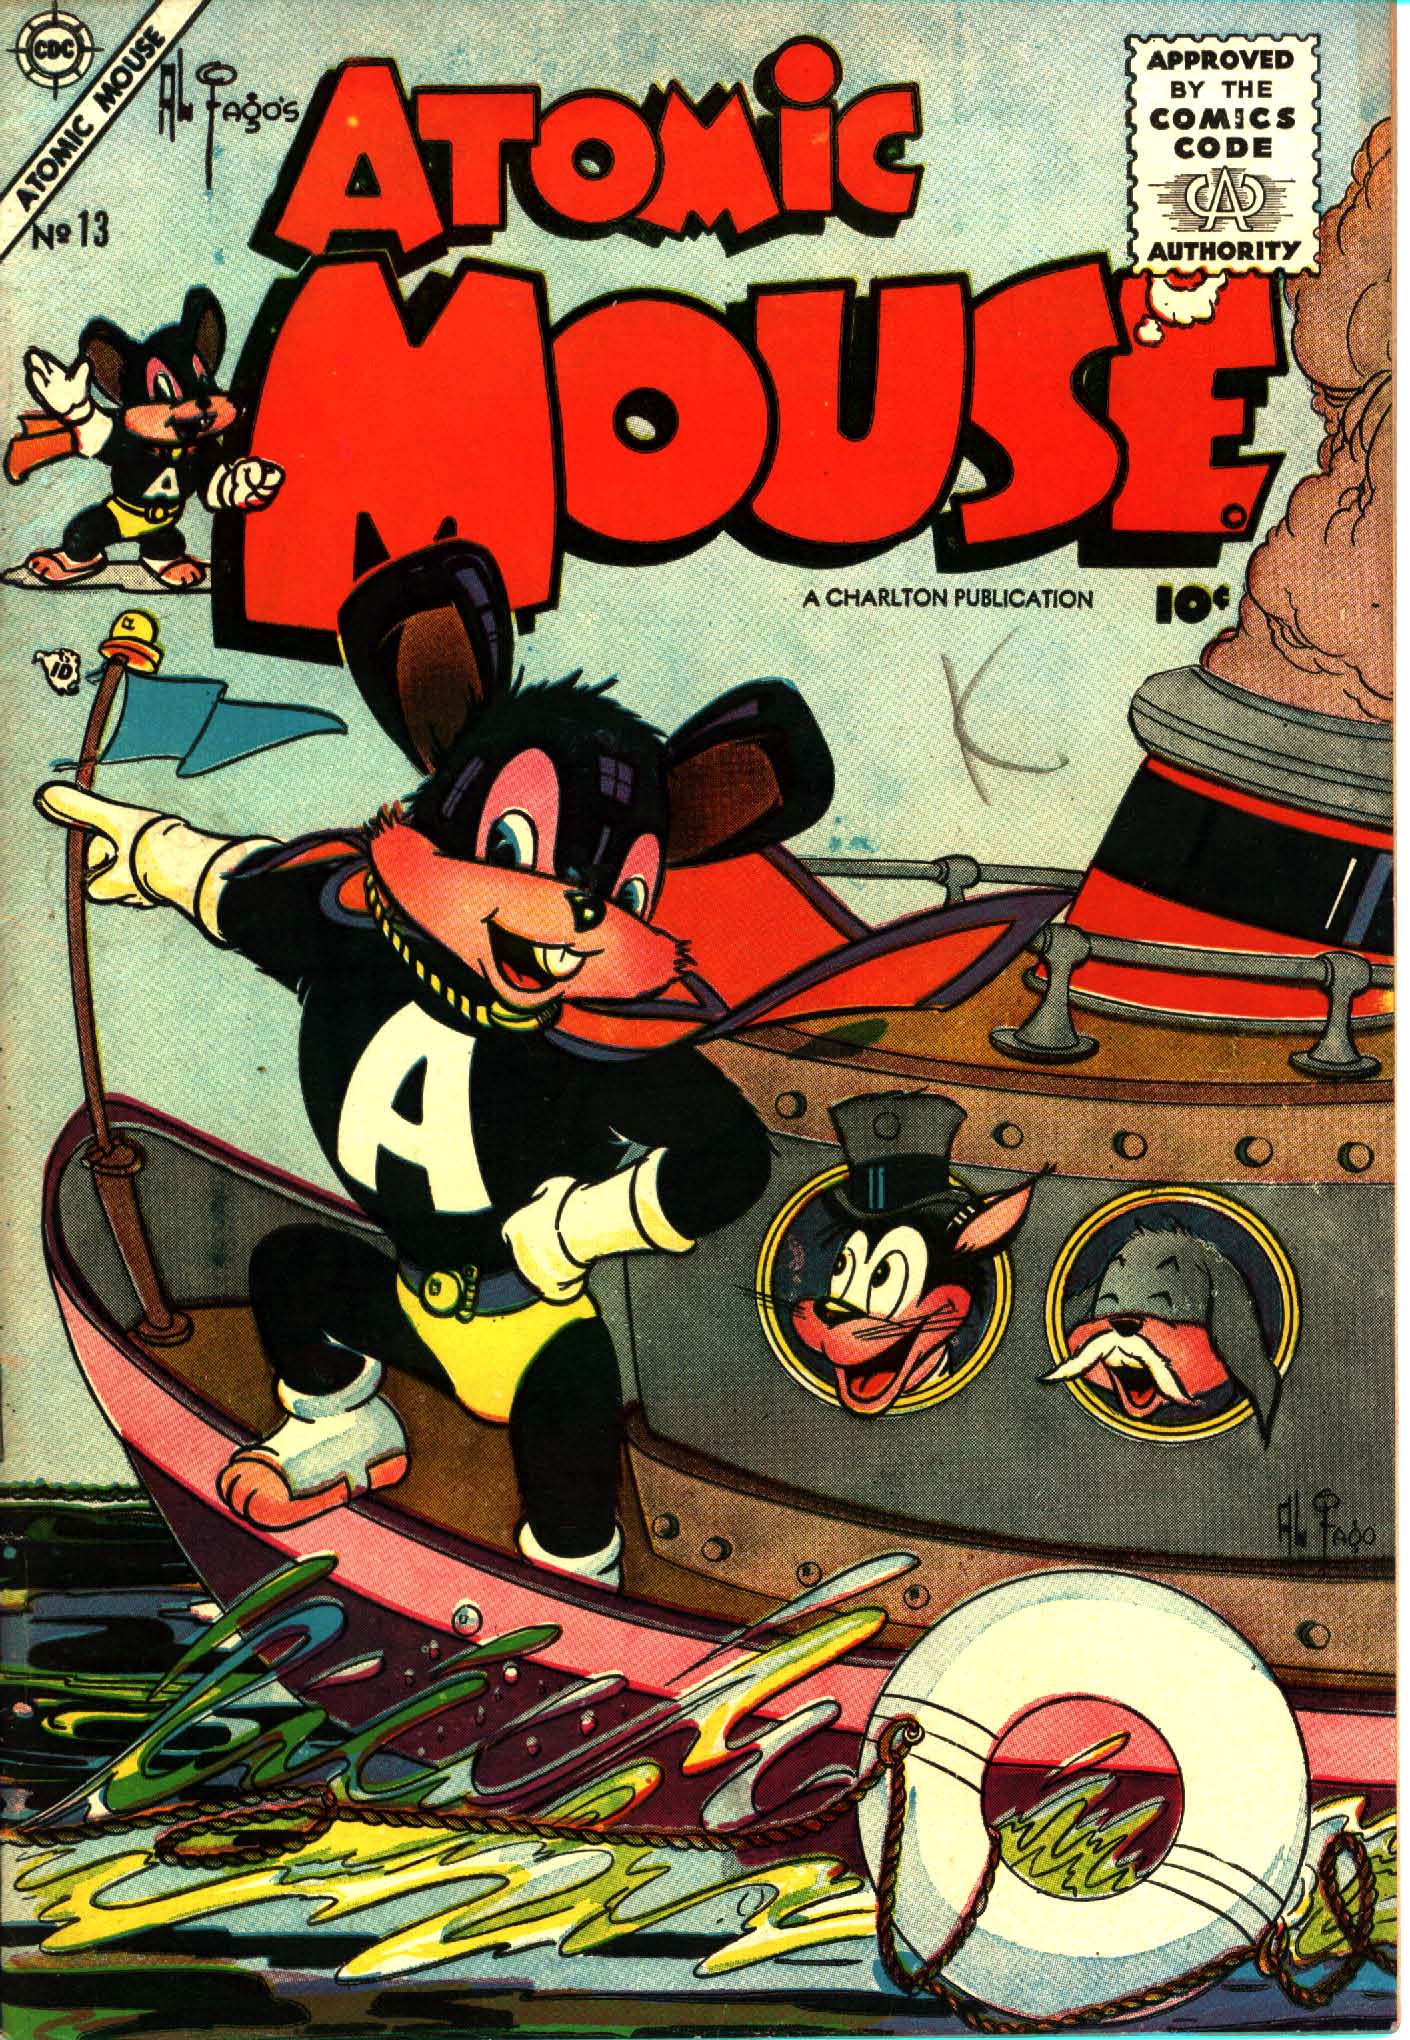 Read online Atomic Mouse comic -  Issue #13 - 1